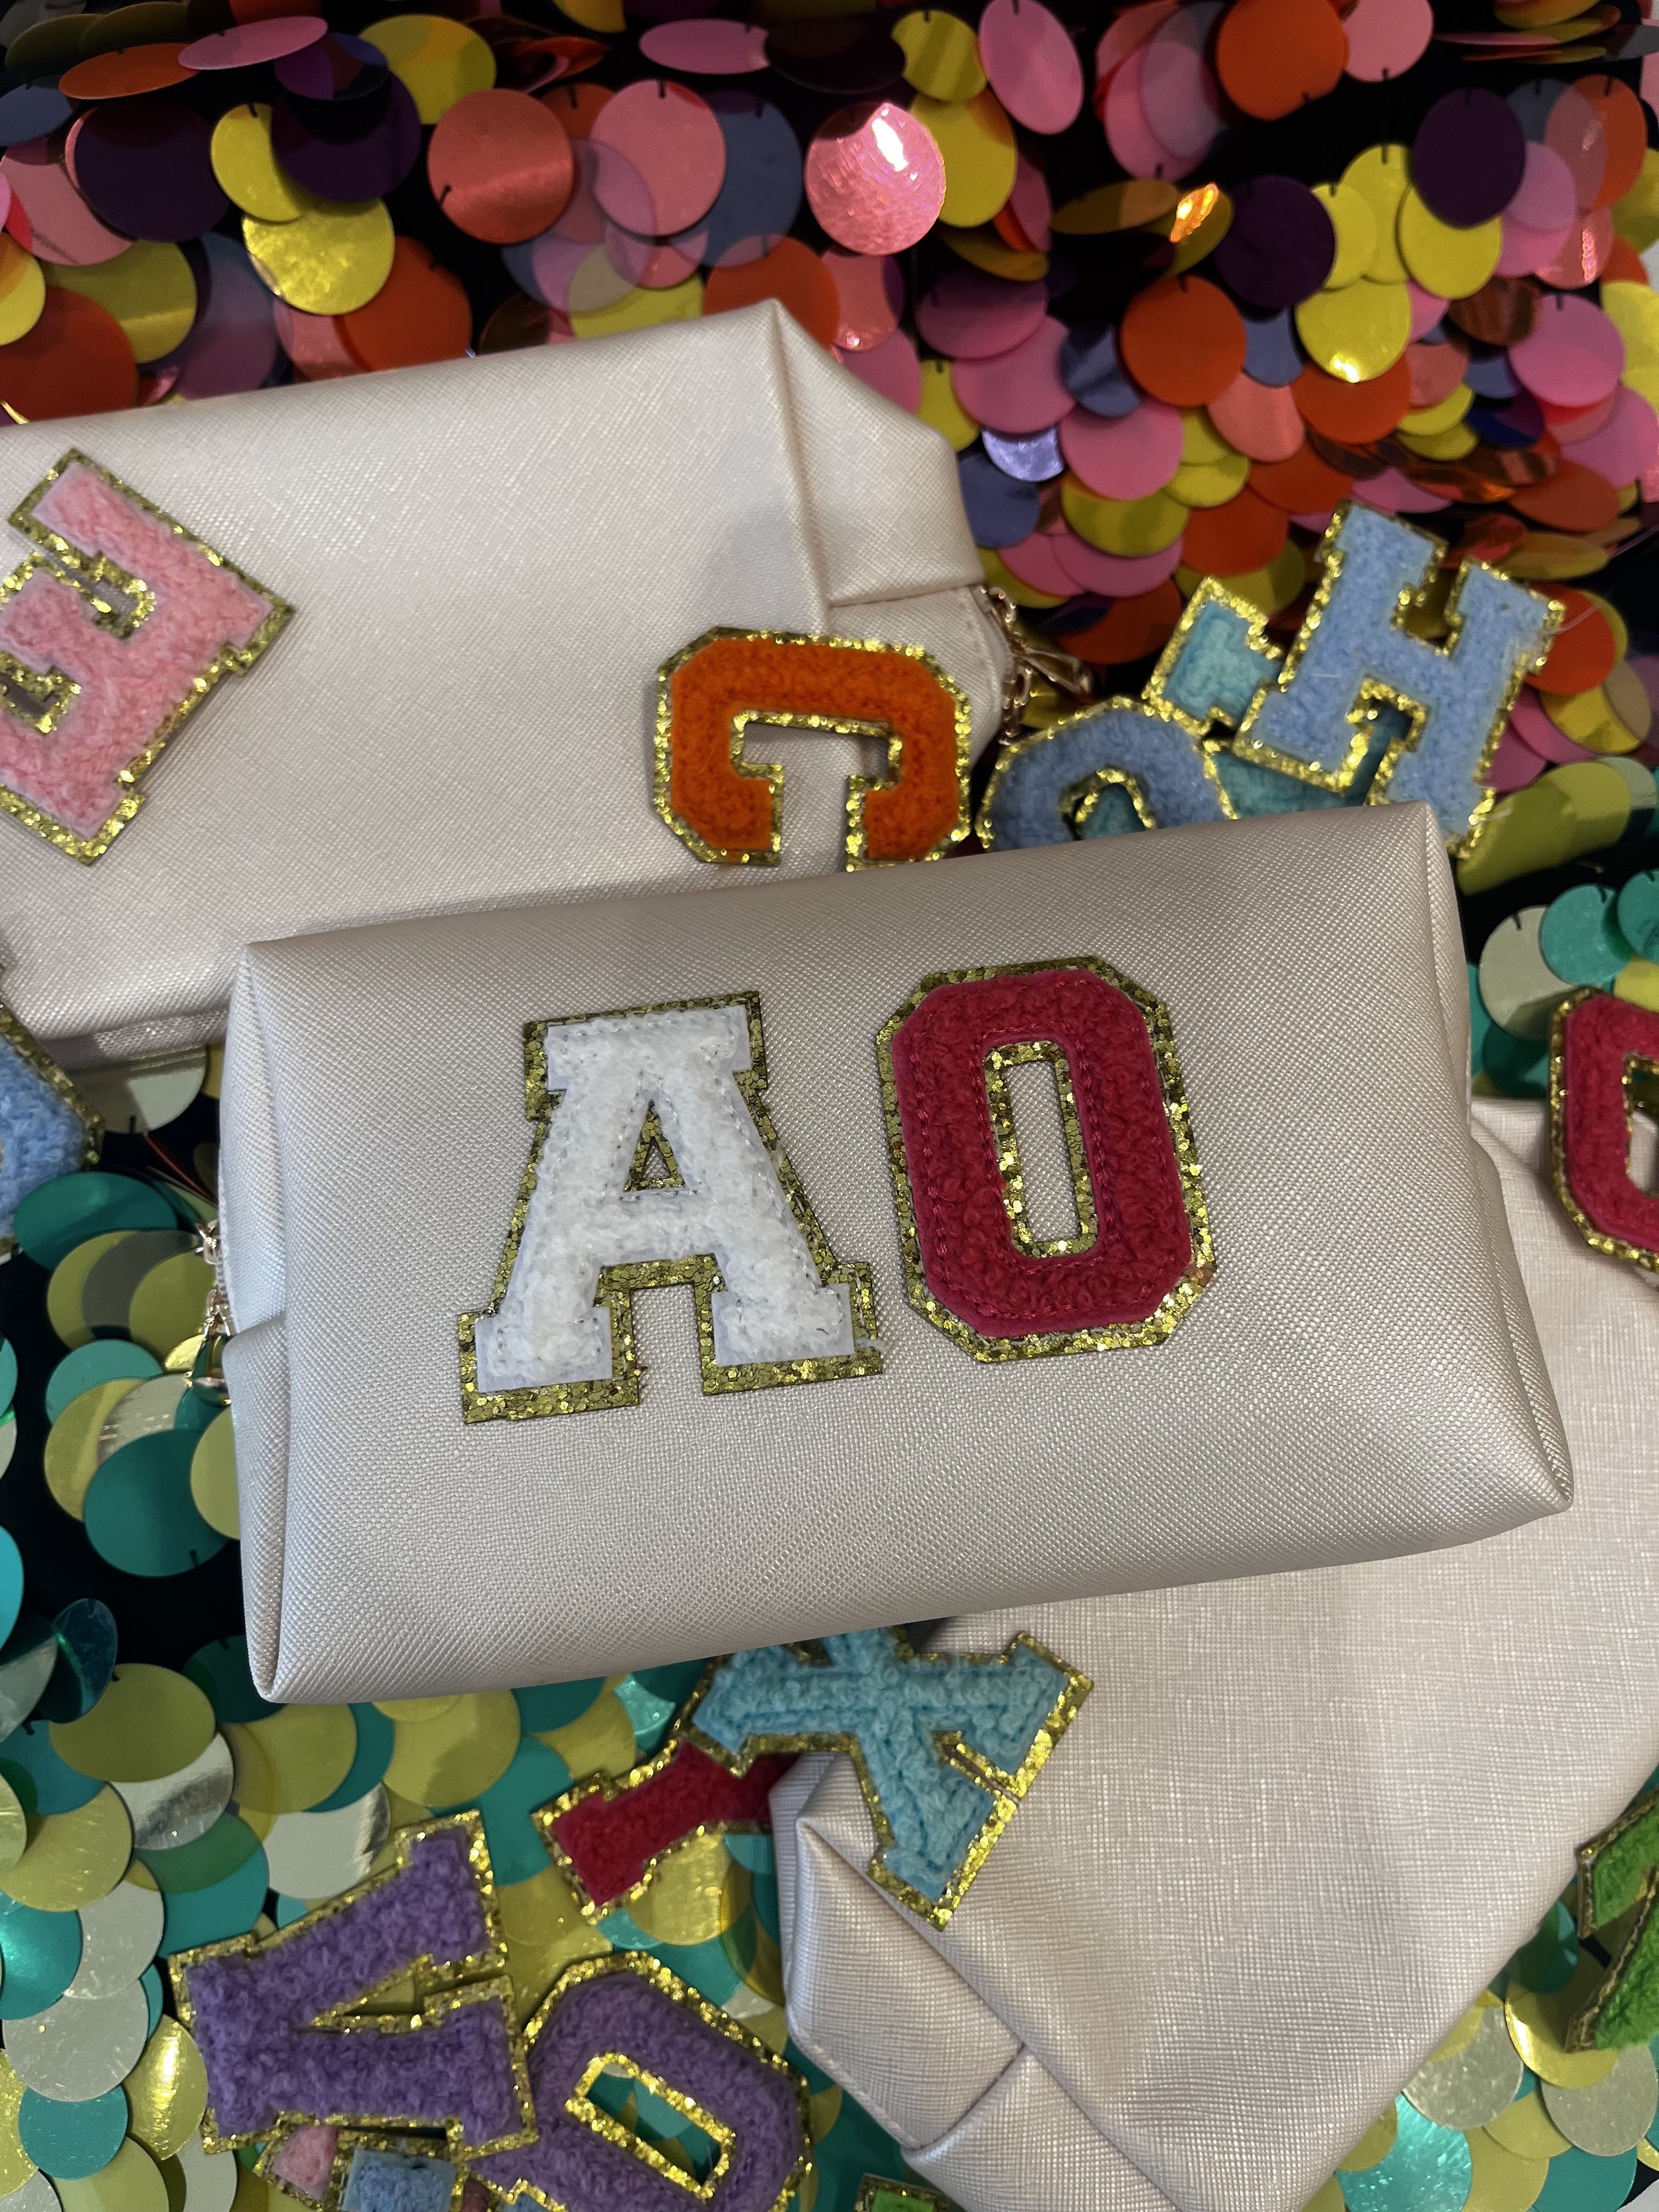 Custom Pouches with Patches Arts and Crafts Parties Near me Hamptons.jpg